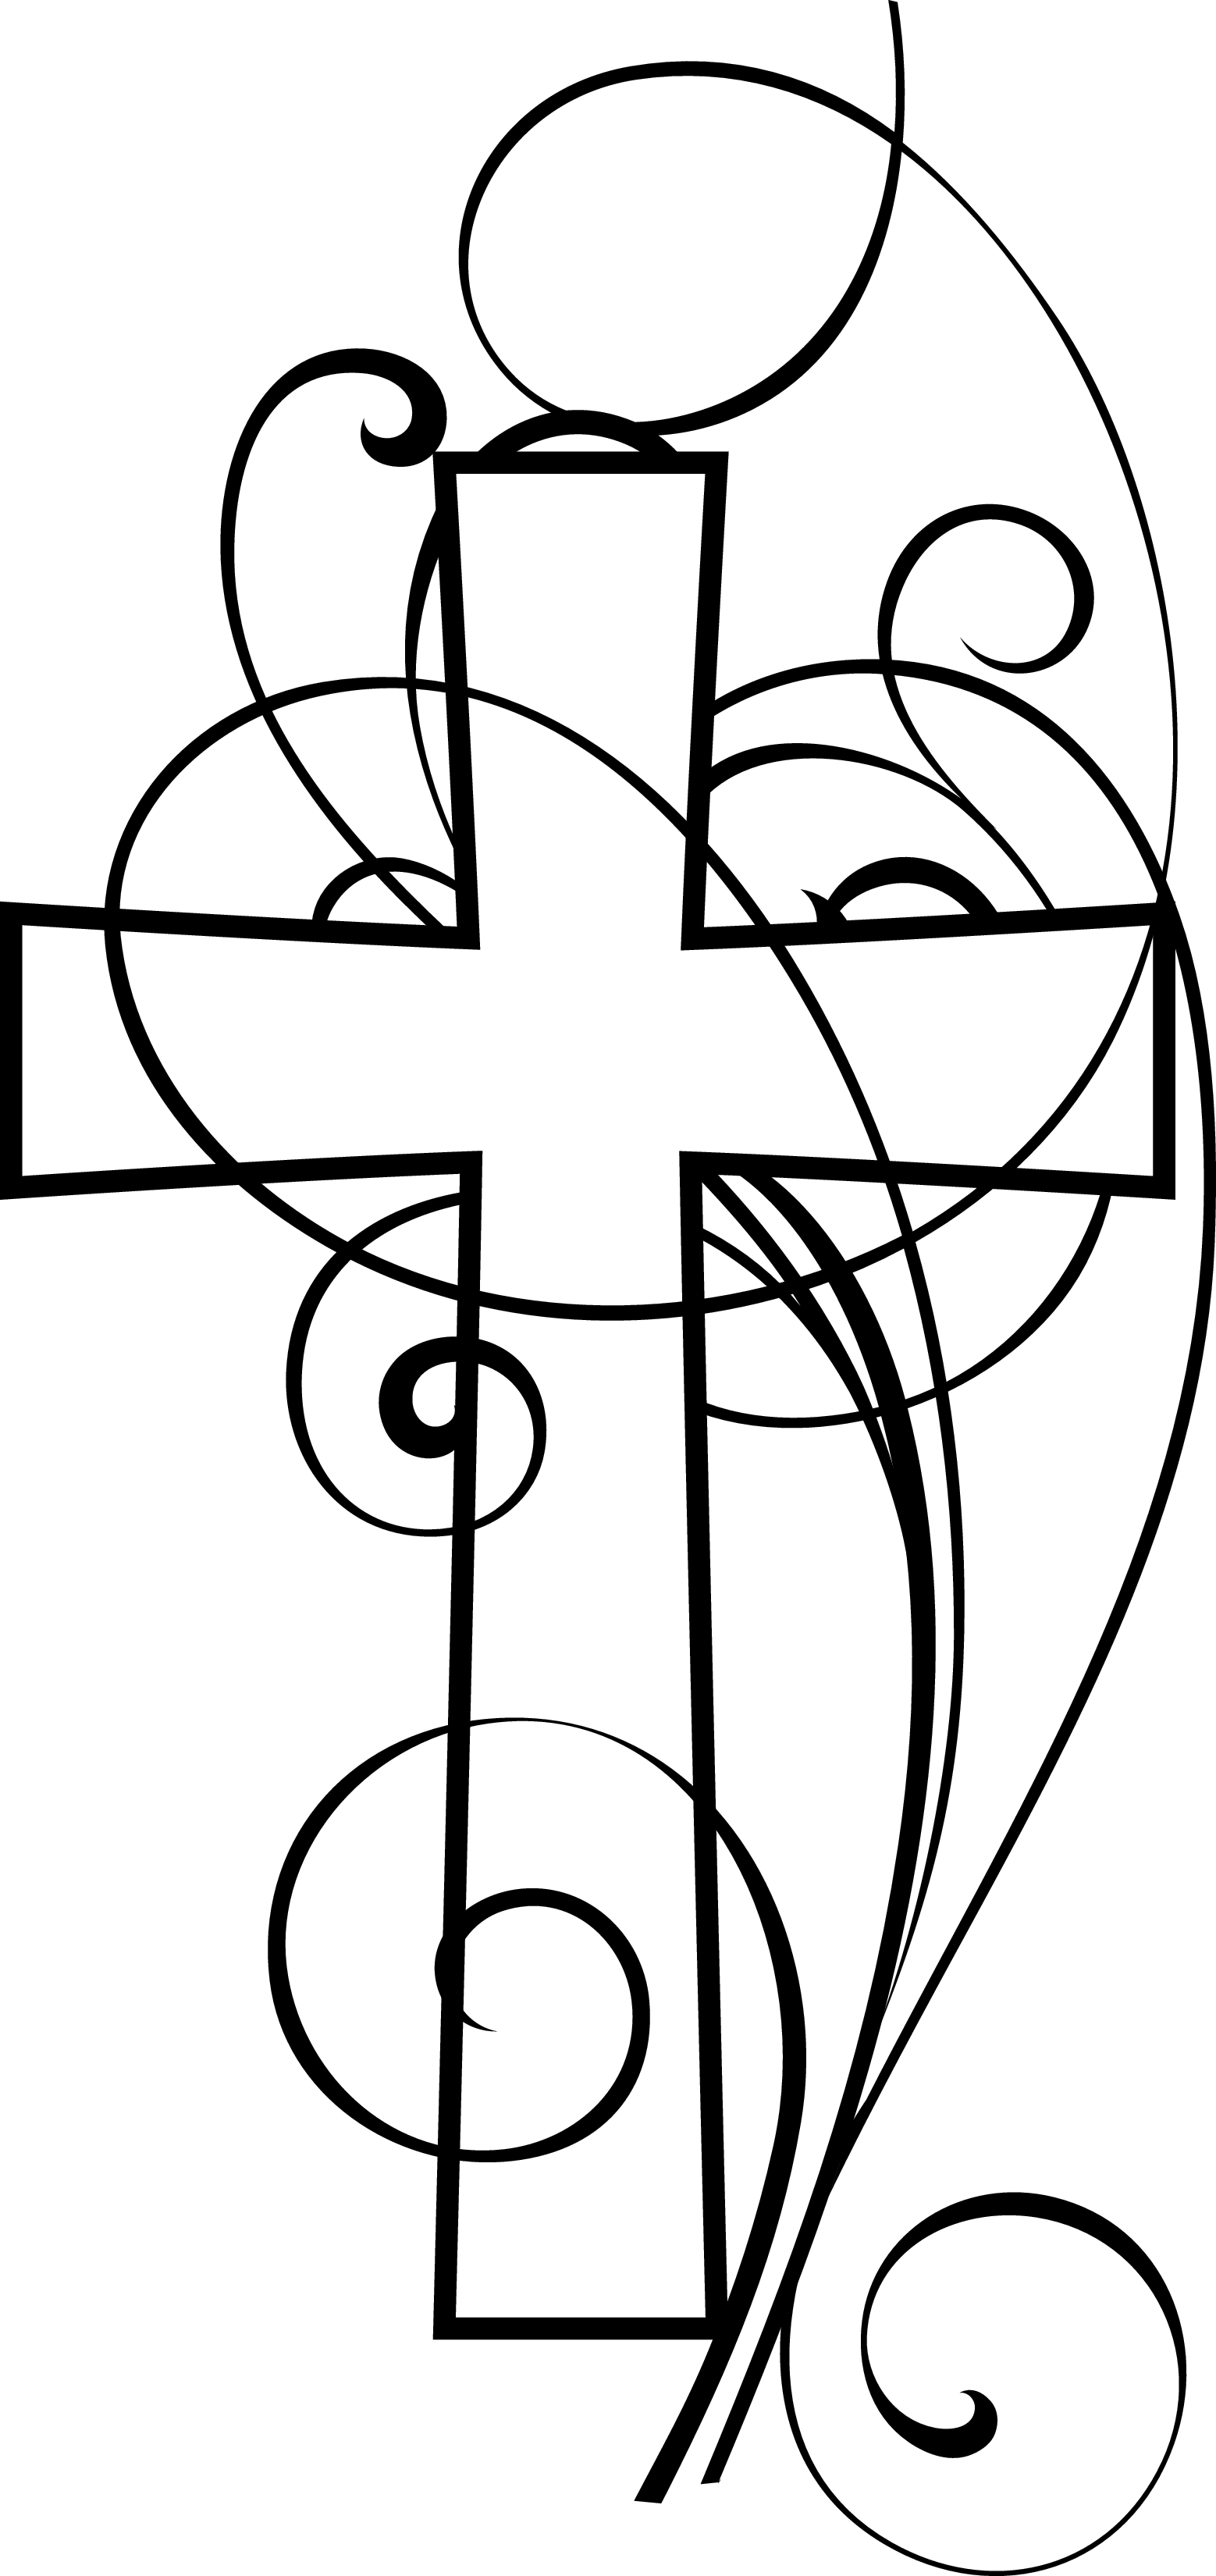 Cross Clipart Black And White   Clipart Panda   Free Clipart Images